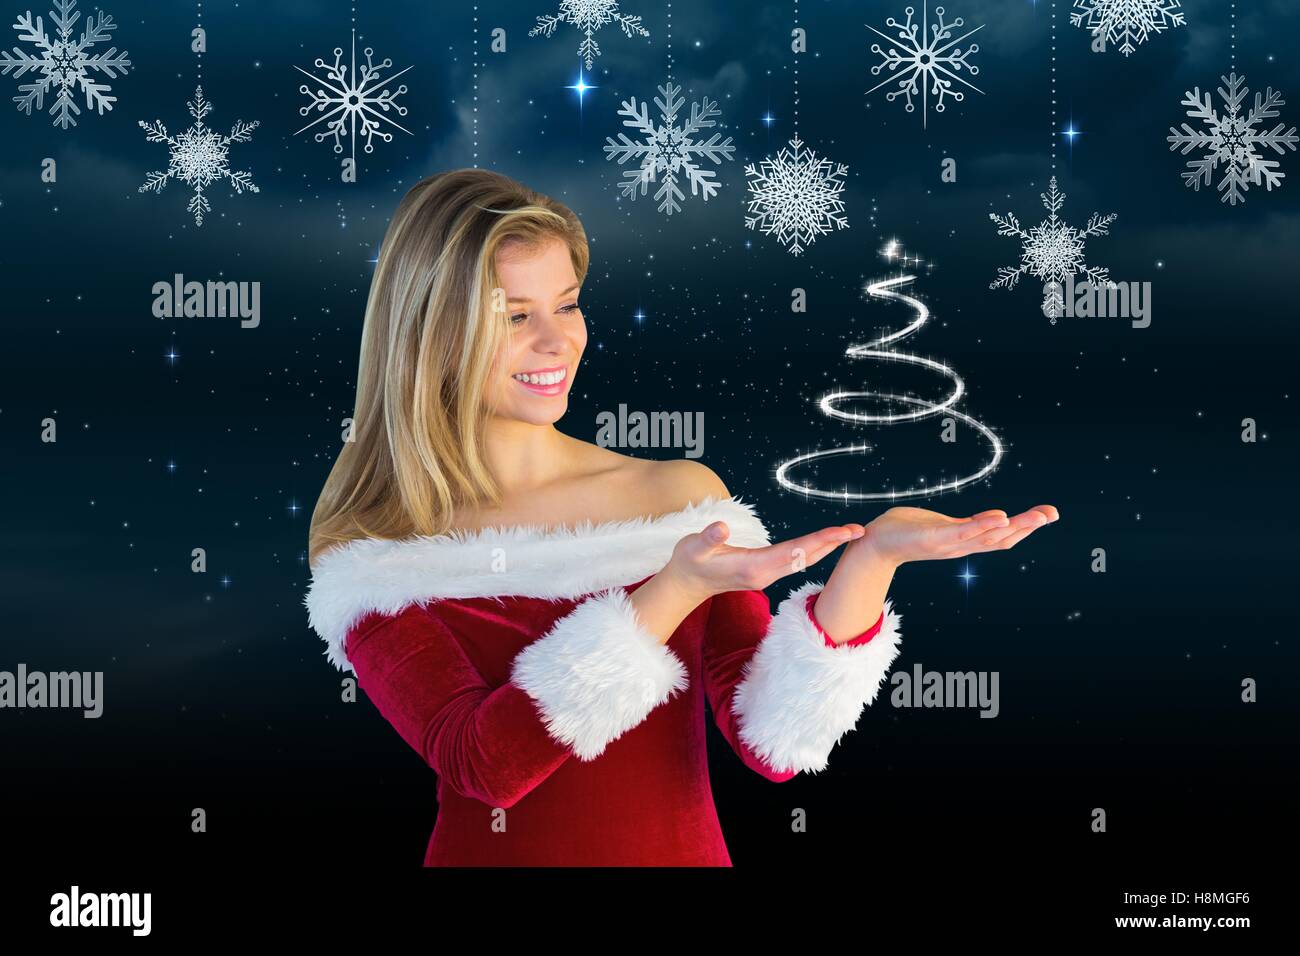 Smiling woman in santa costume pretending to hold a imaginary christmas tree Stock Photo